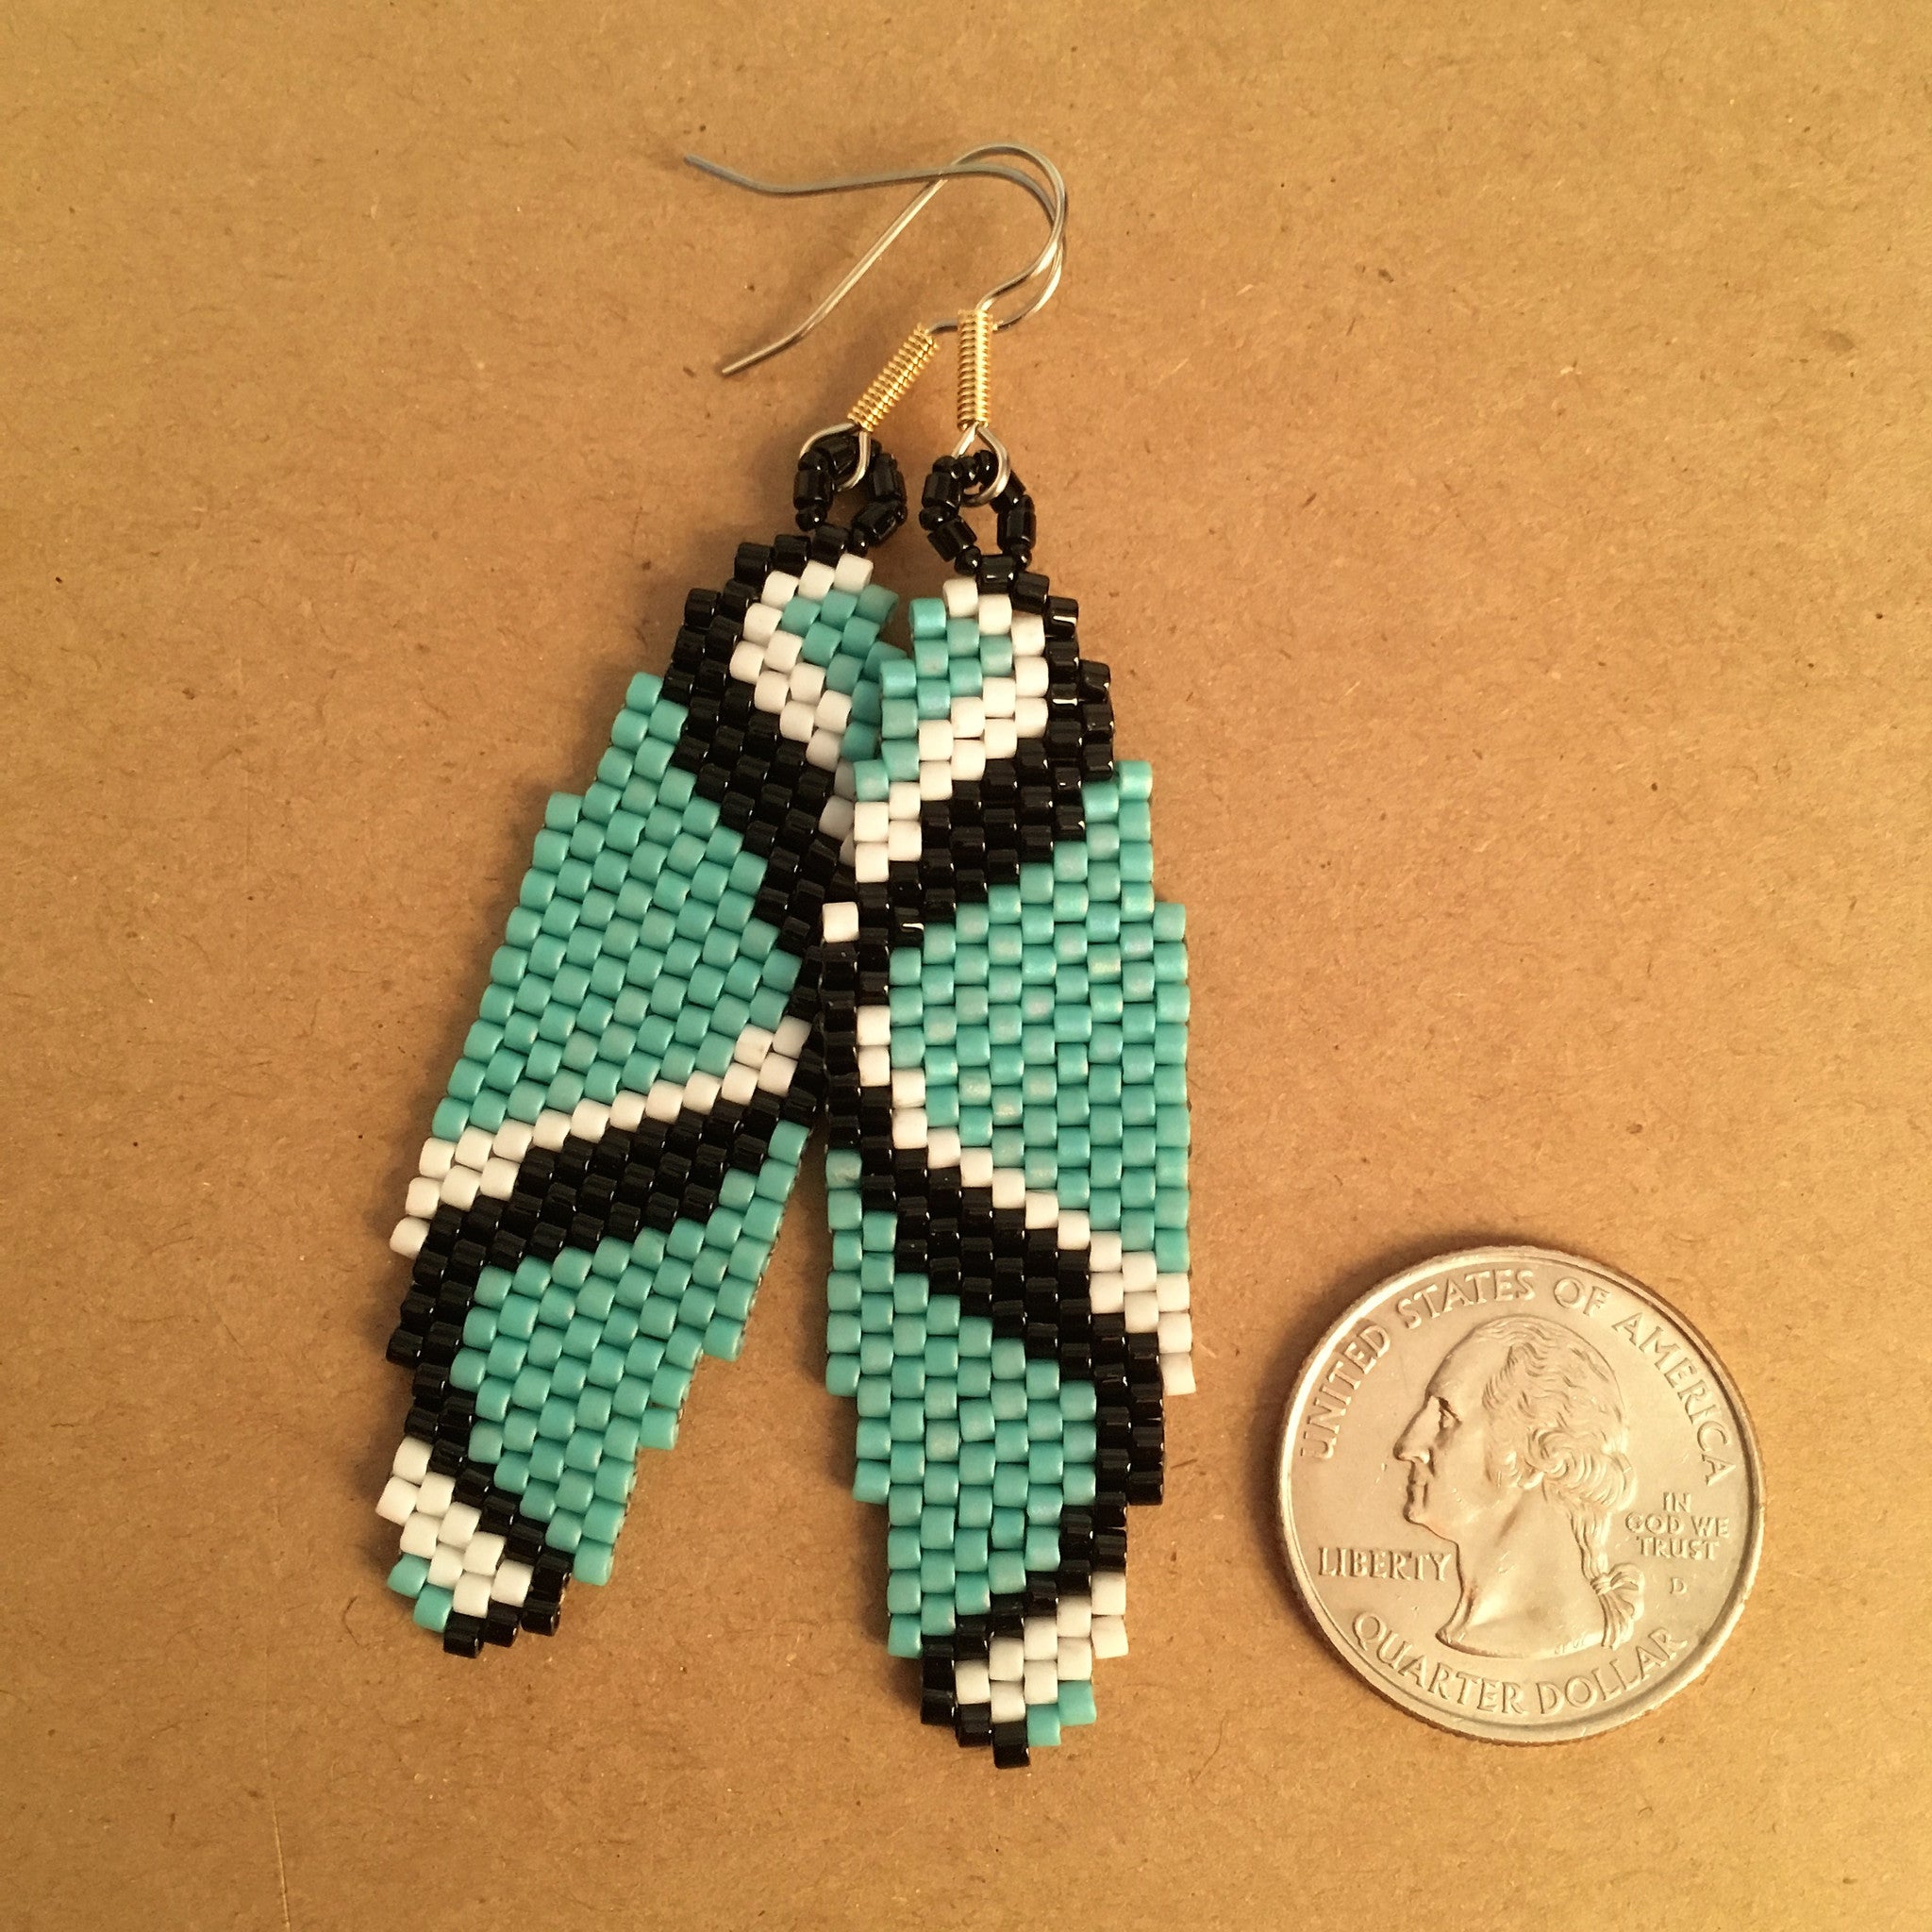 Sine Wave Earrings in Turquoise, Black and White